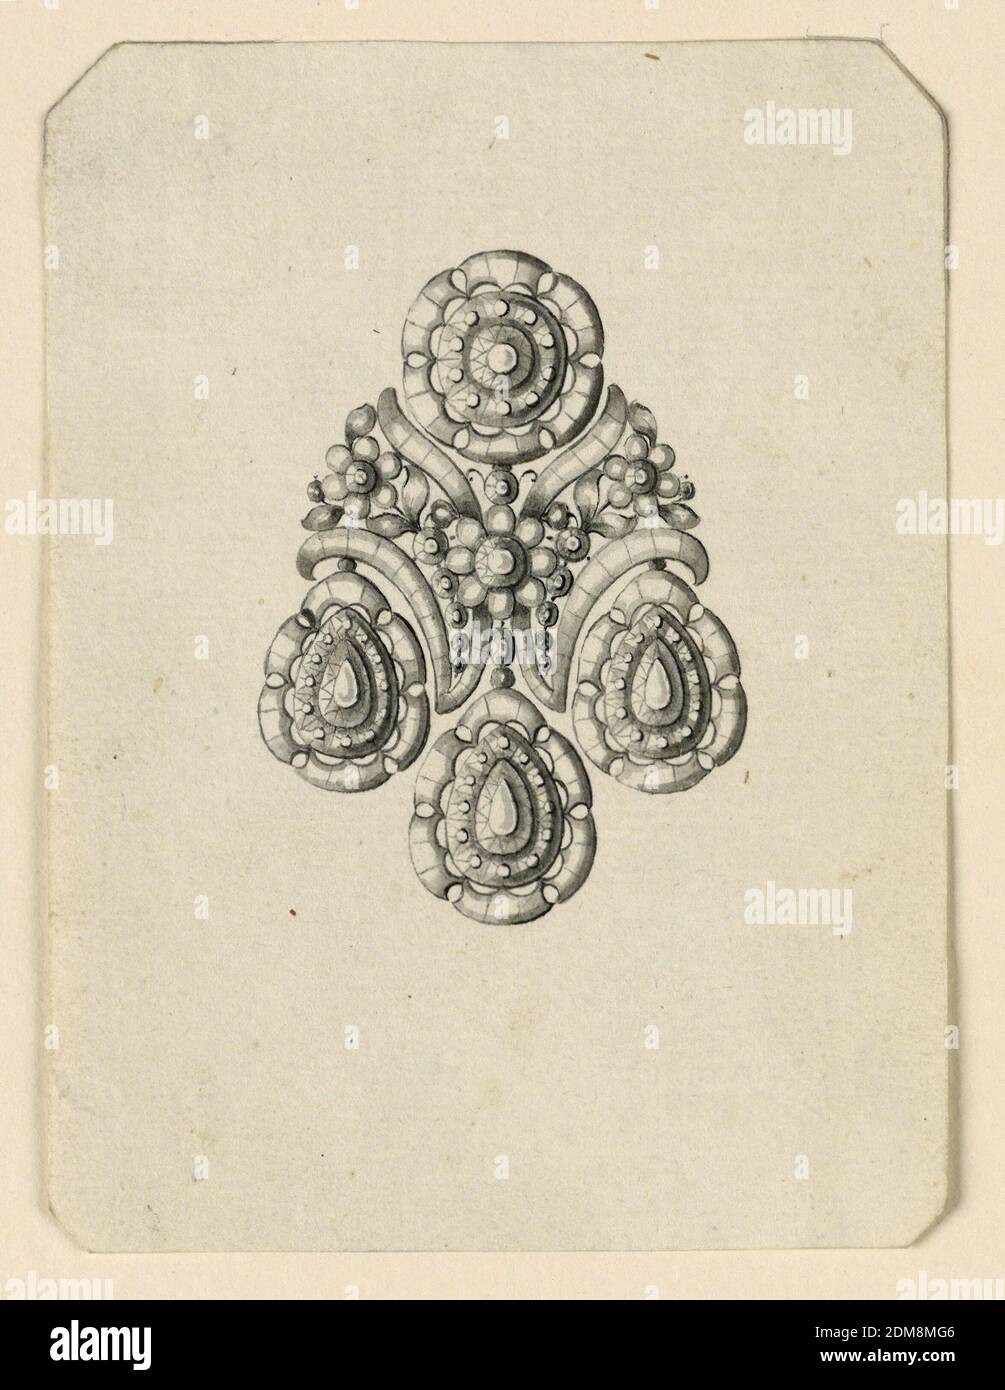 Design for an Earring, Pen and black ink, brush and gray watercolor on light green paper, Jewelry design for an earring. The usual scheme with a disk above and three drops below. In the center, two cornucopia-like frames of ribbons with a flower stem above a row of disks. Bevelled corners., probably Naples, South Italy, Italy, late 18th century, jewelry, Drawing Stock Photo